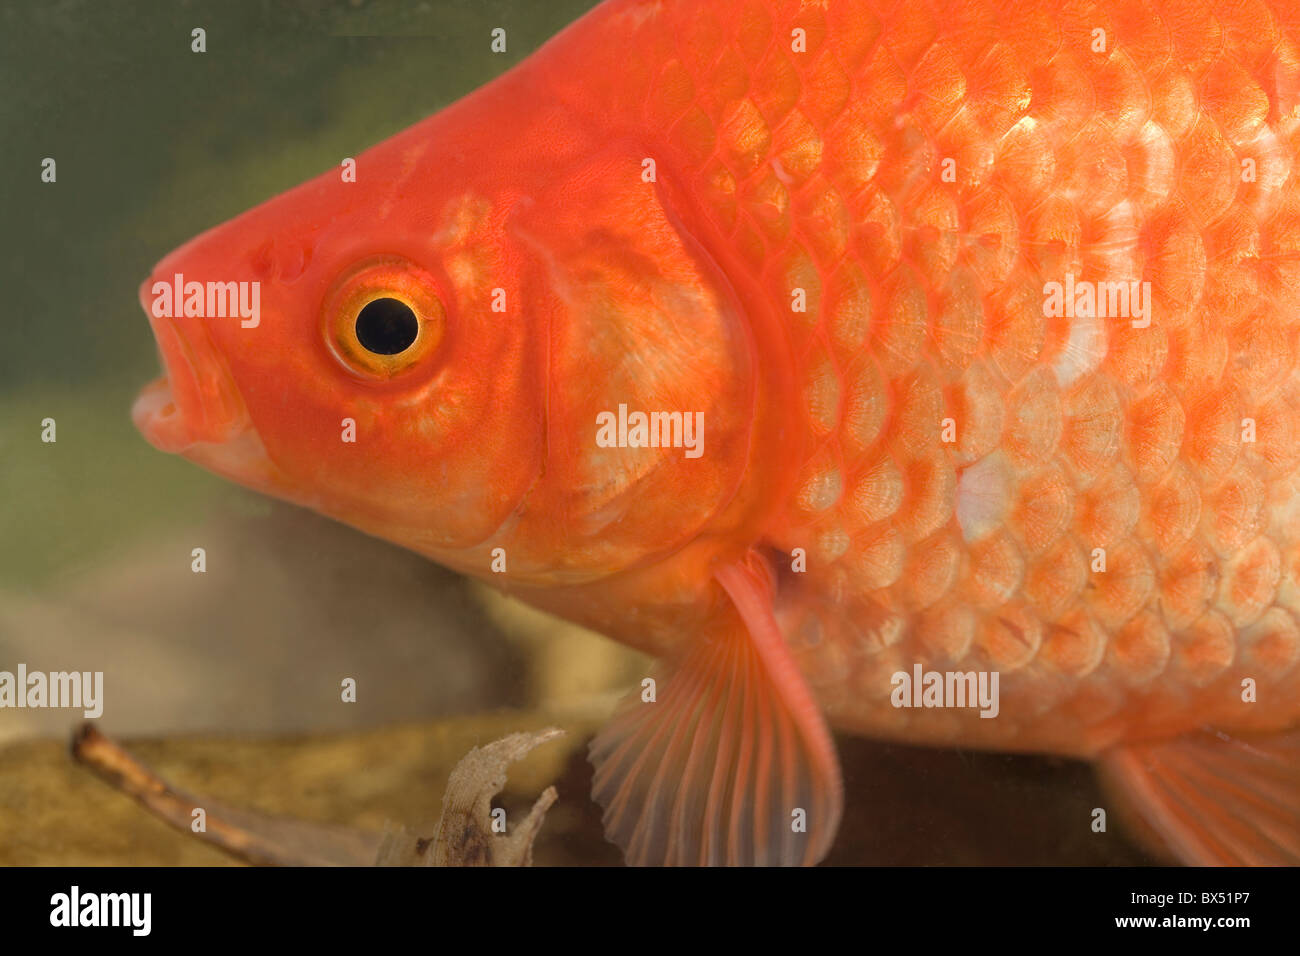 Goldfish Carassius auratus. Head end showing mouth, eye, gill cover, body scales, pectoral fin. Stock Photo